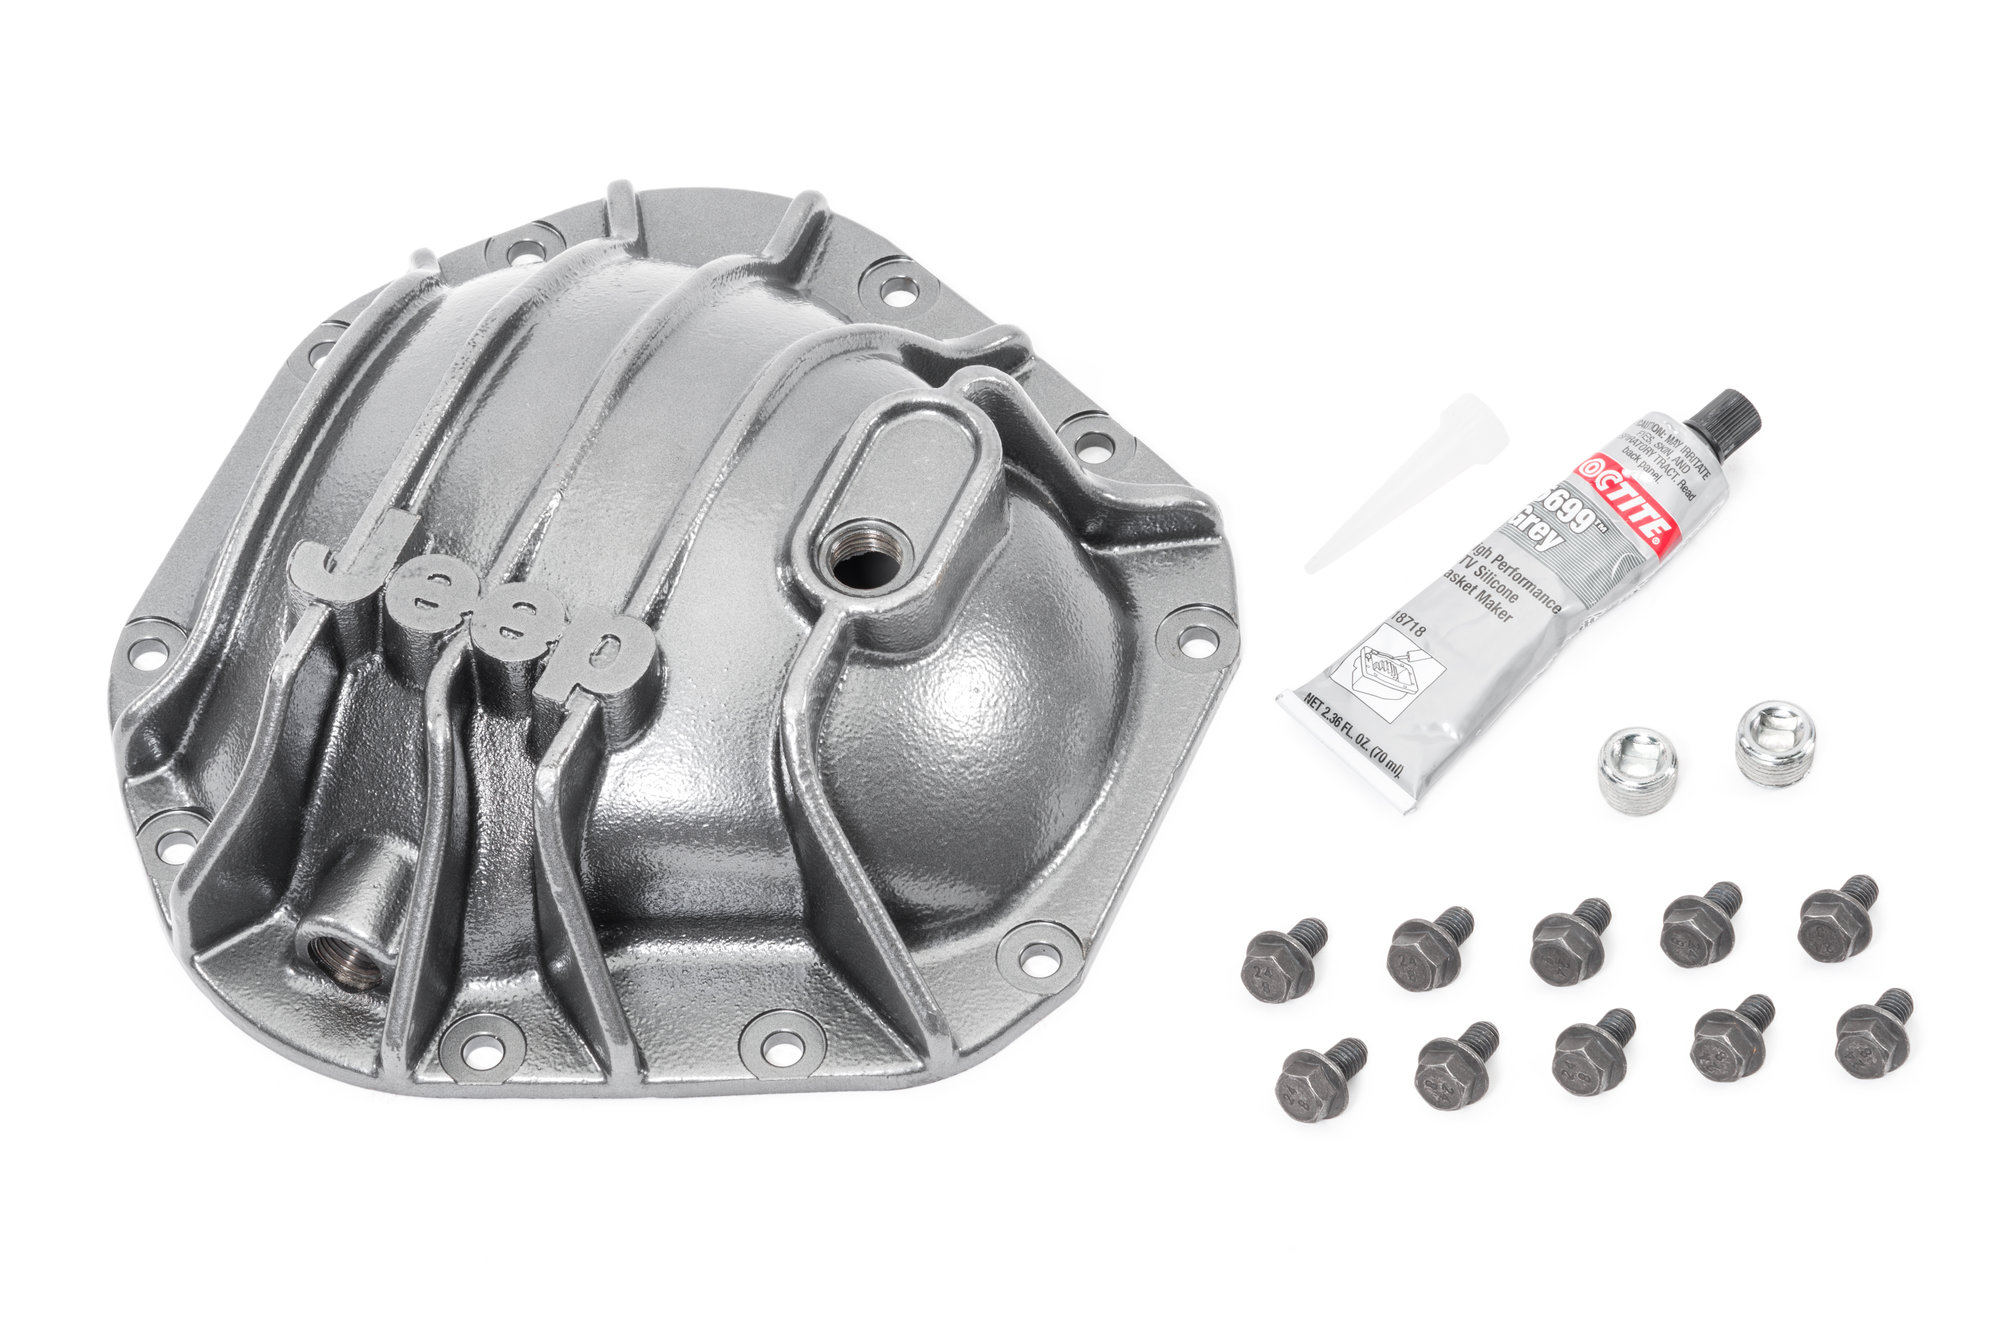 Heavy Duty Differential Cover Dana60/70 FREE SHIPPING !!!